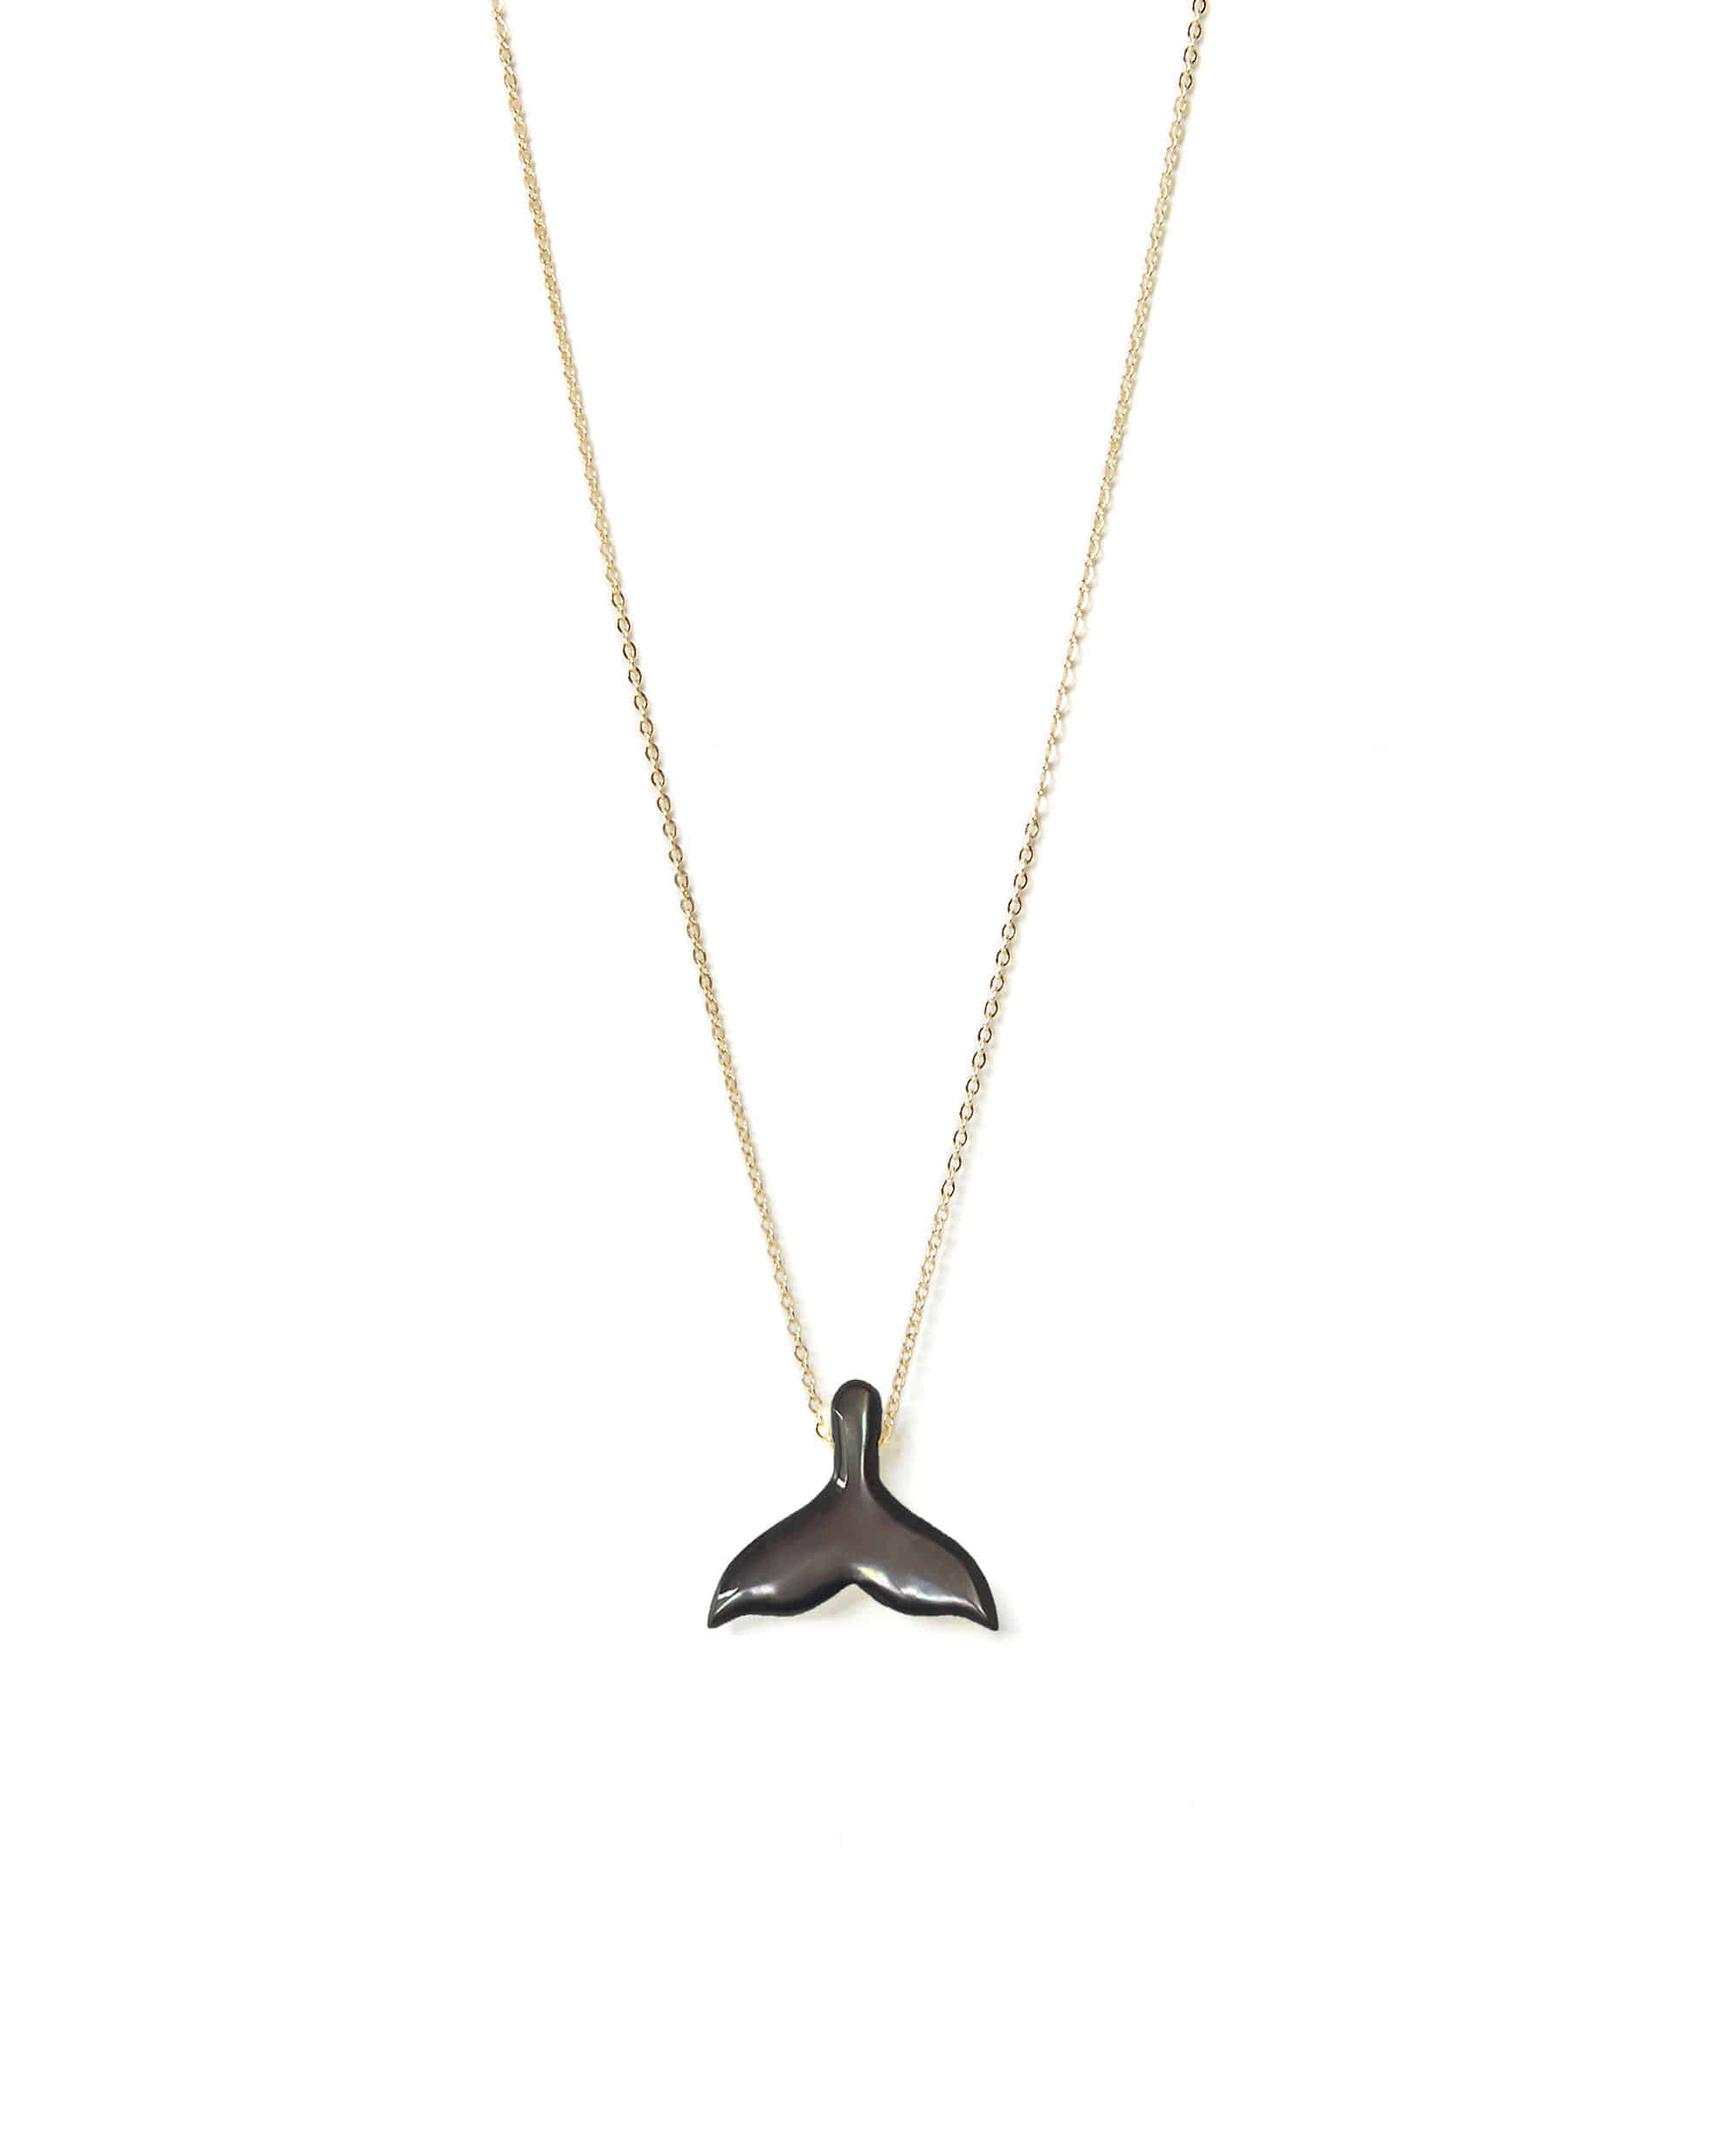 Dolphin Tail Black mother-of-pearl Necklace